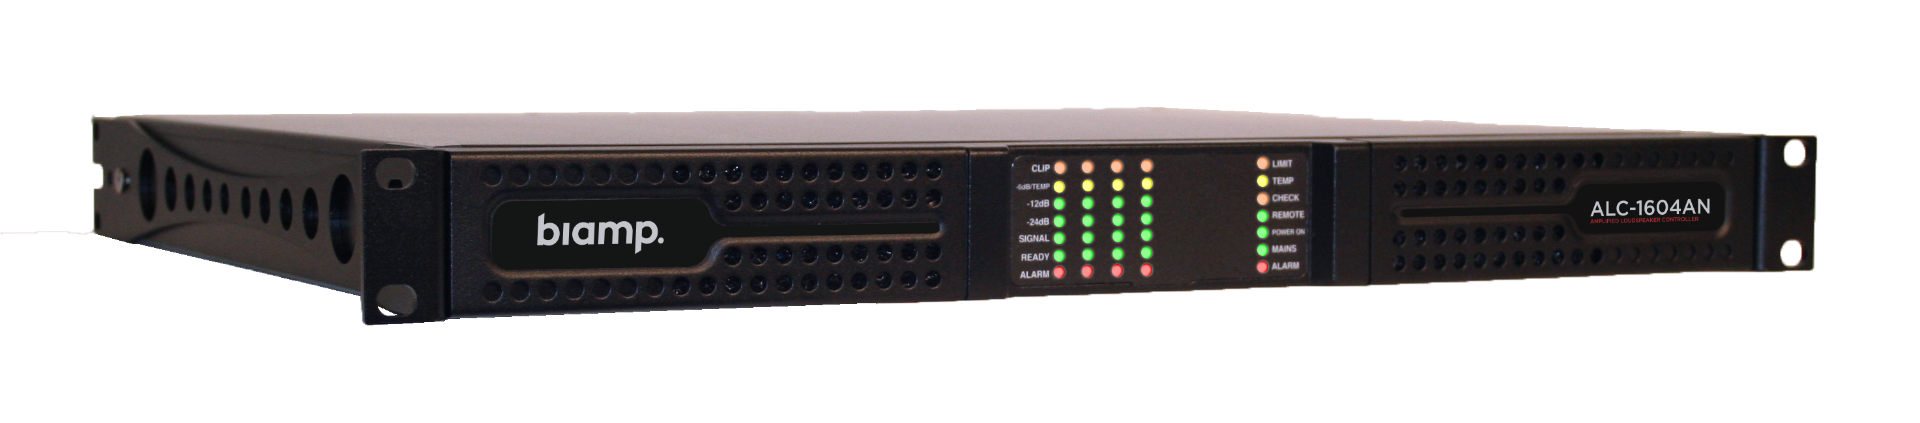 Community ALC-1604AN -4-Channels 1600W + DSP, Analog Input, Amplified Loudspeaker Controllers